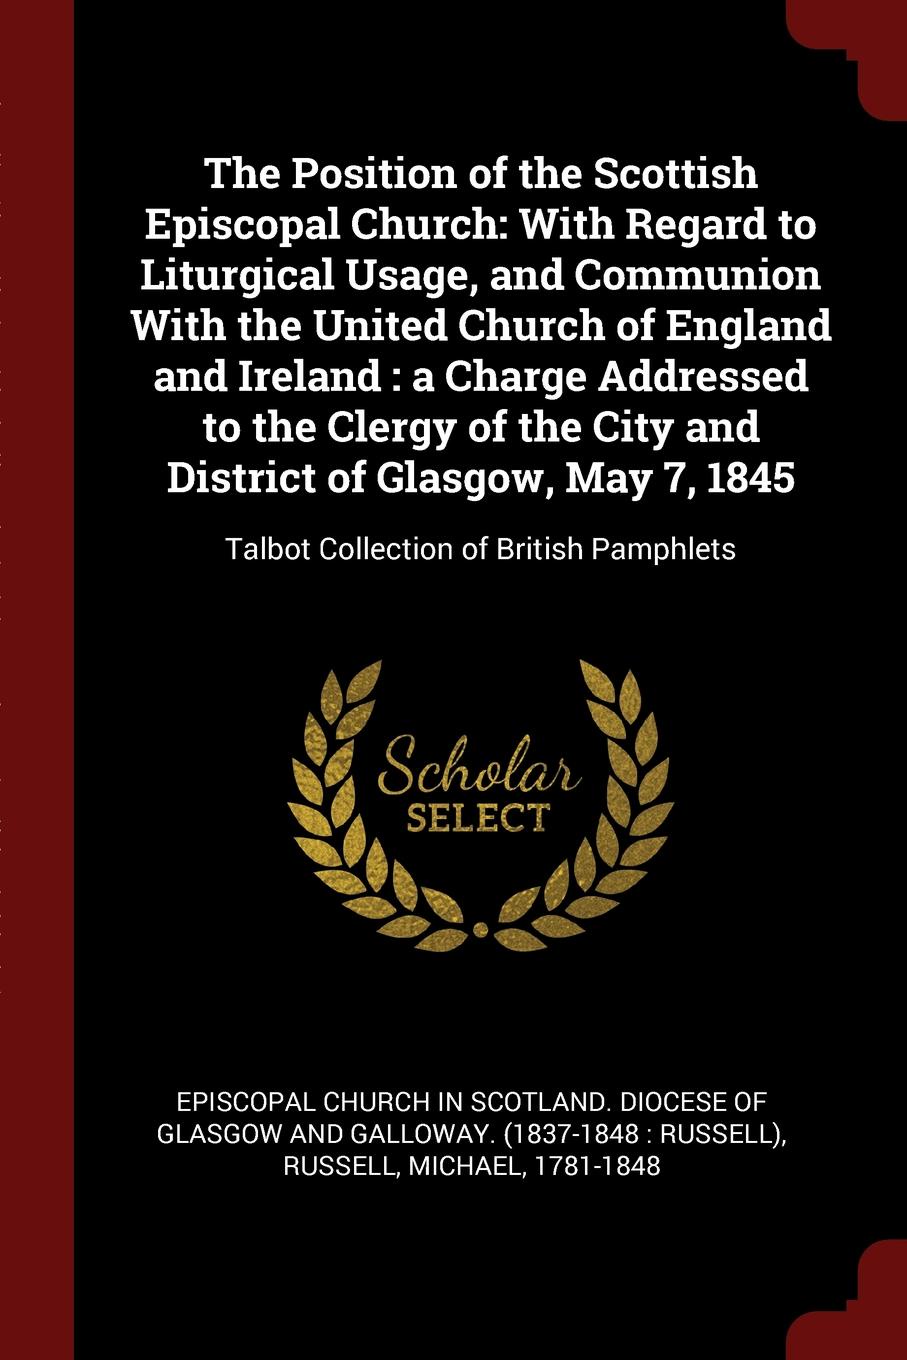 The Position of the Scottish Episcopal Church. With Regard to Liturgical Usage, and Communion With the United Church of England and Ireland : a Charge Addressed to the Clergy of the City and District of Glasgow, May 7, 1845: Talbot Collection of B...